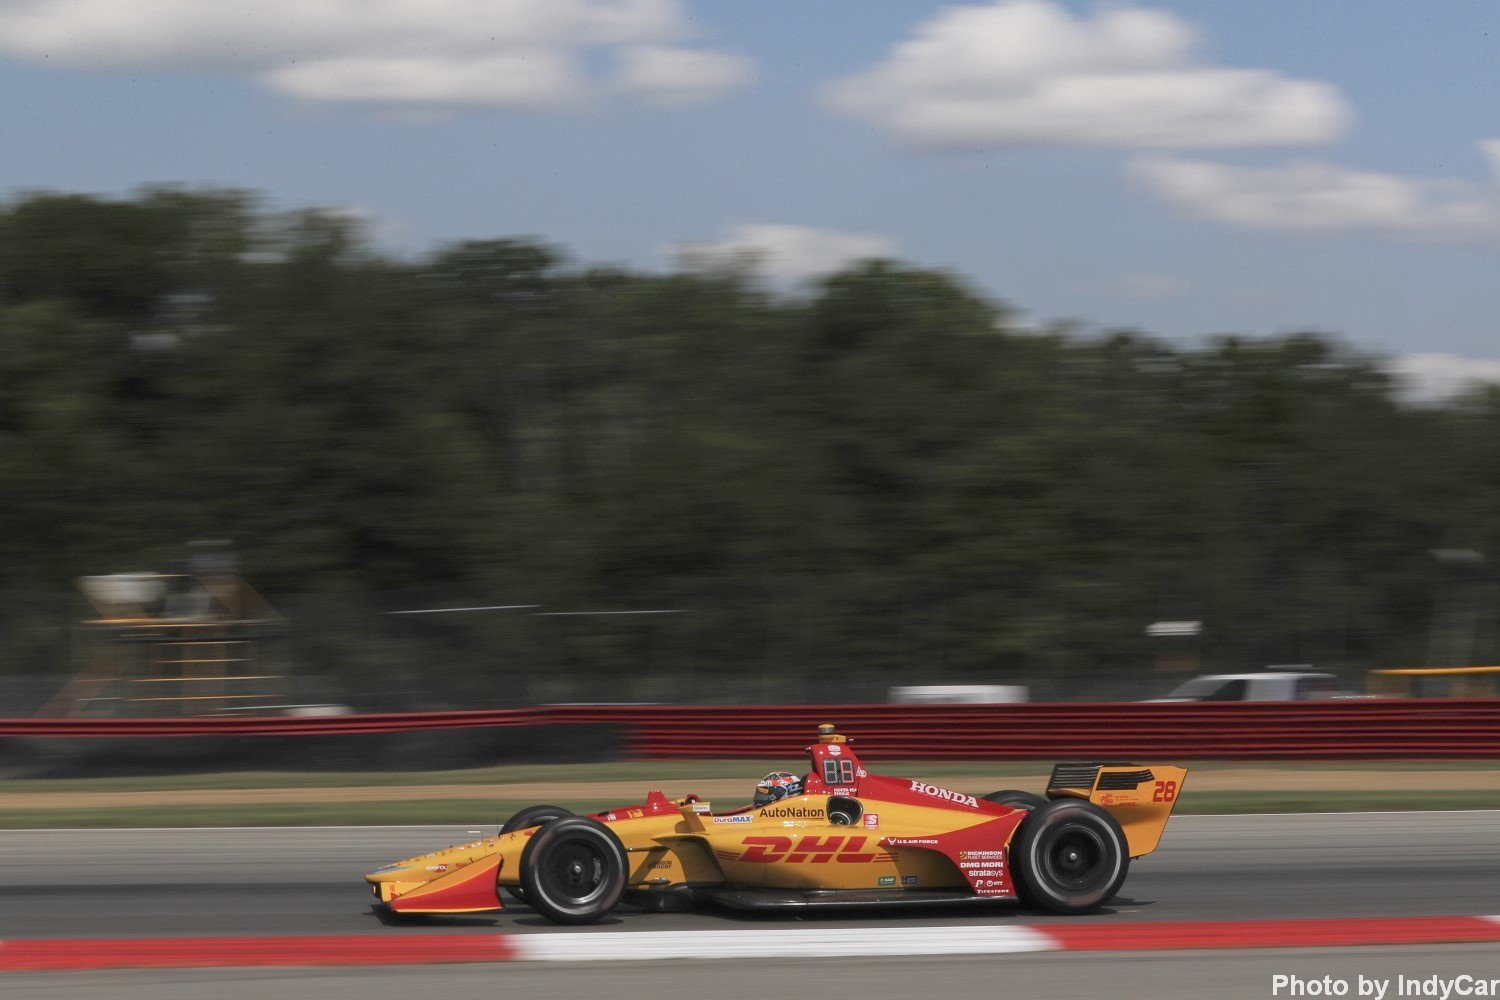 Hunter-Reay drove a strong race to finish 3rd